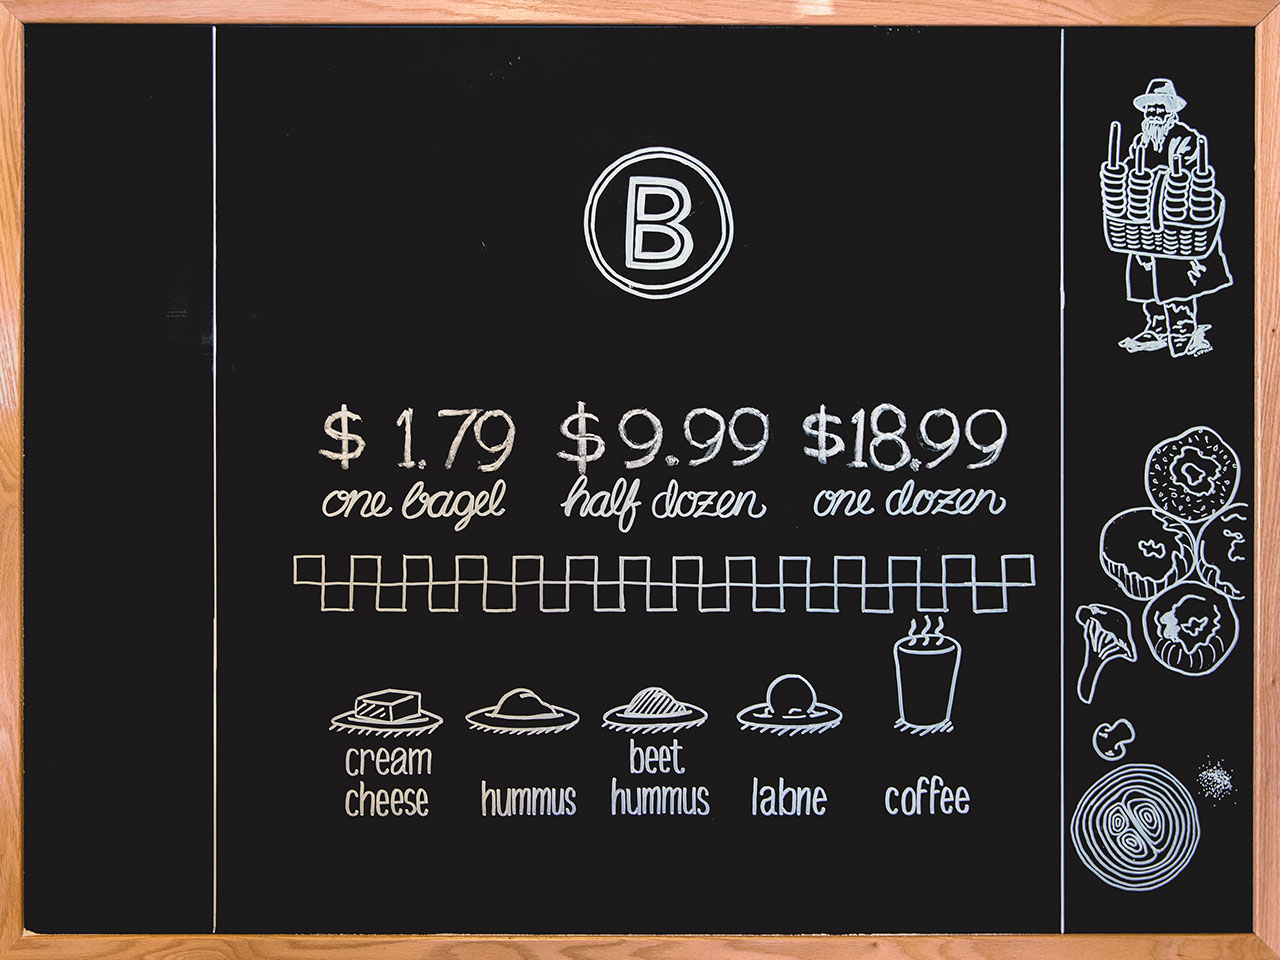 Black chalkboard with white chalked BernBaum's B logo, pricing for bagels, and illustrations of spread options